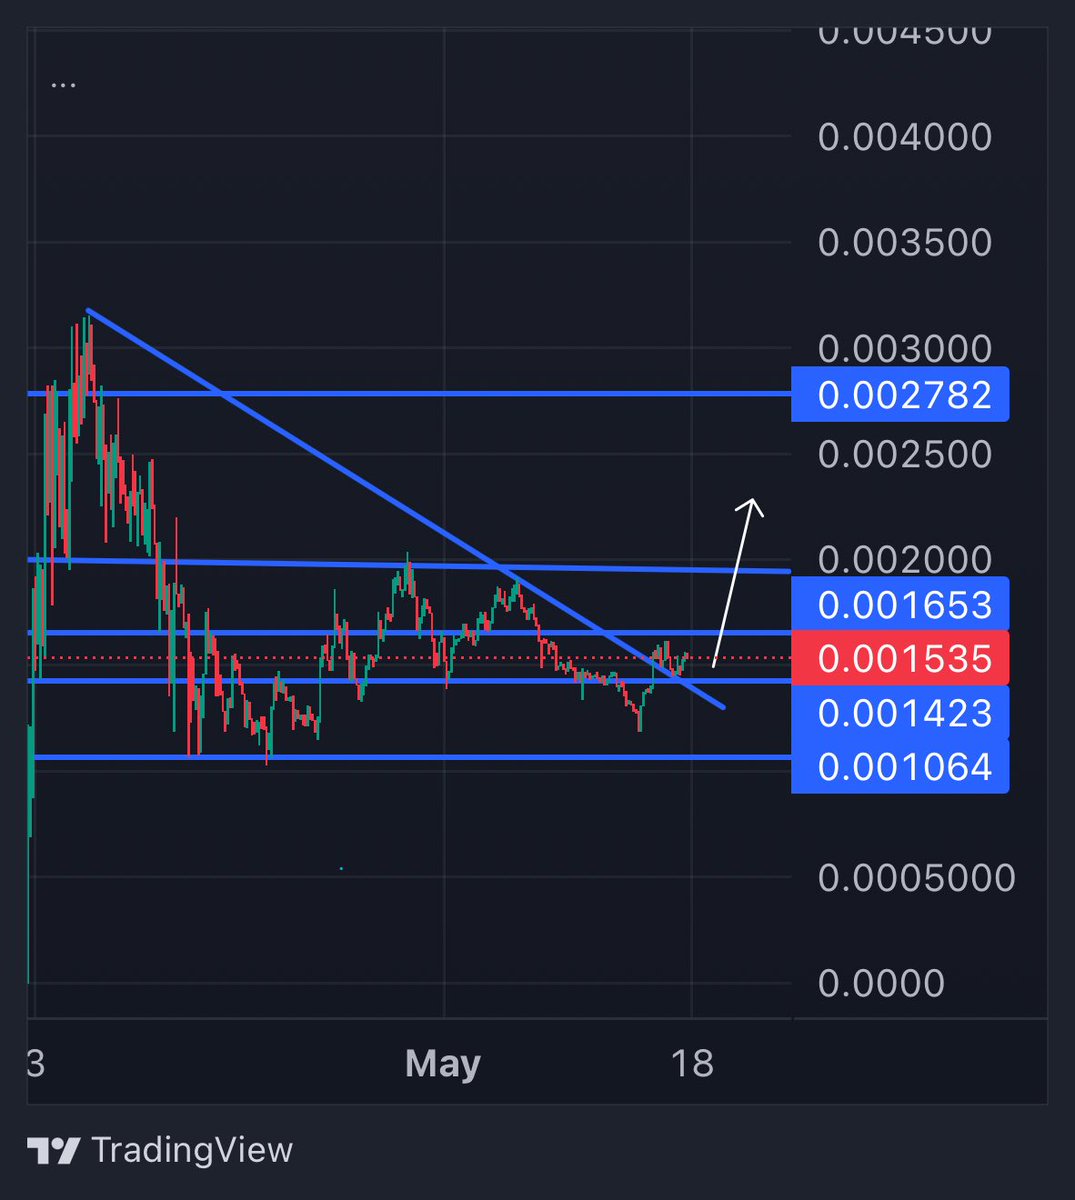 $HASHAI with the breakout & retest

The AI L1 they are building is going live soon - First L1 AI 

$1M expansion  — 1,000+ GPU’s 
- Node rentals

This looks ready for a move towards $.0027 in the short term 

One of my higher conviction AI utility plays